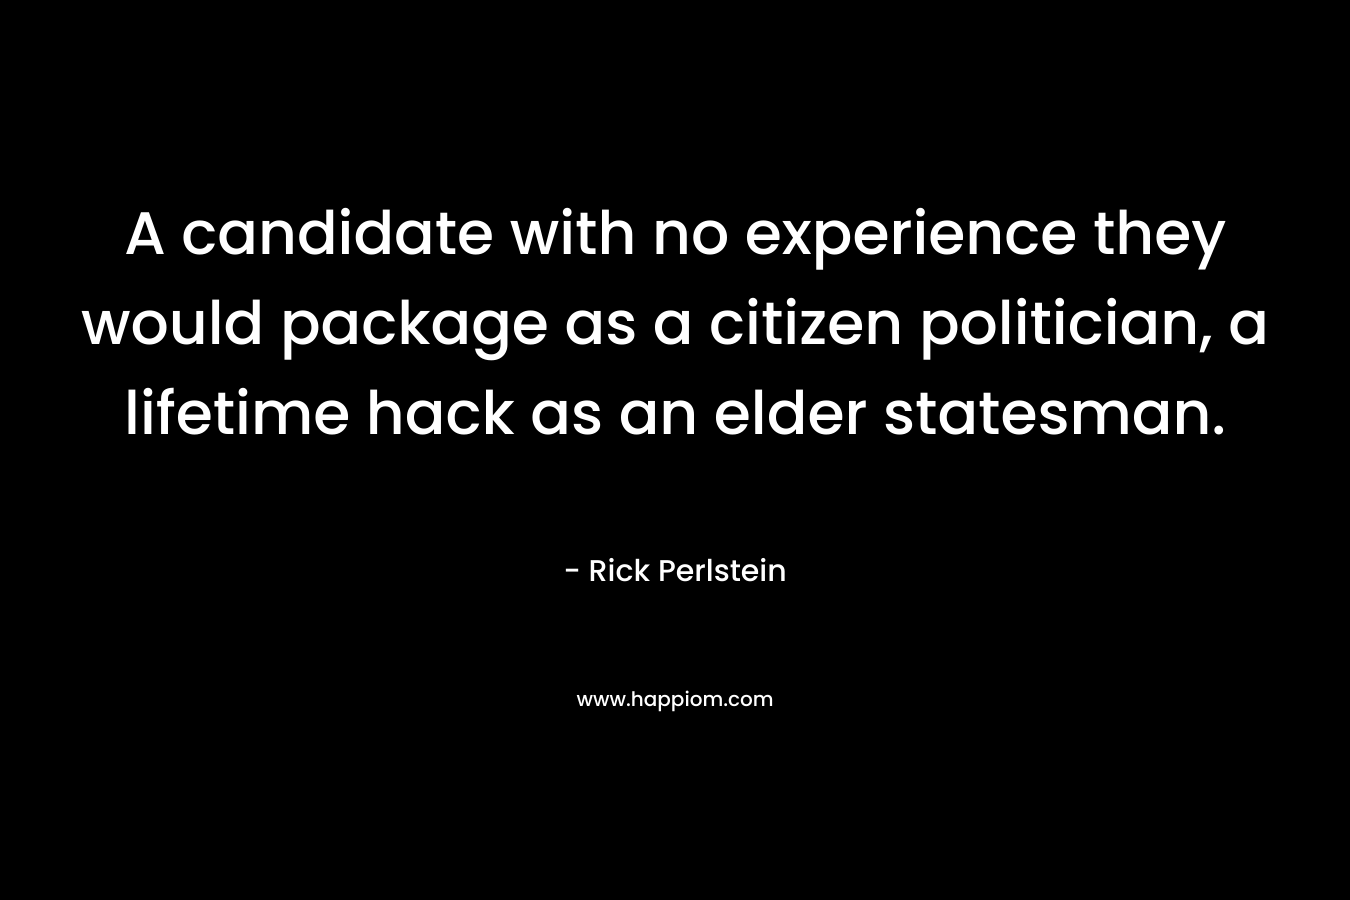 A candidate with no experience they would package as a citizen politician, a lifetime hack as an elder statesman. – Rick Perlstein